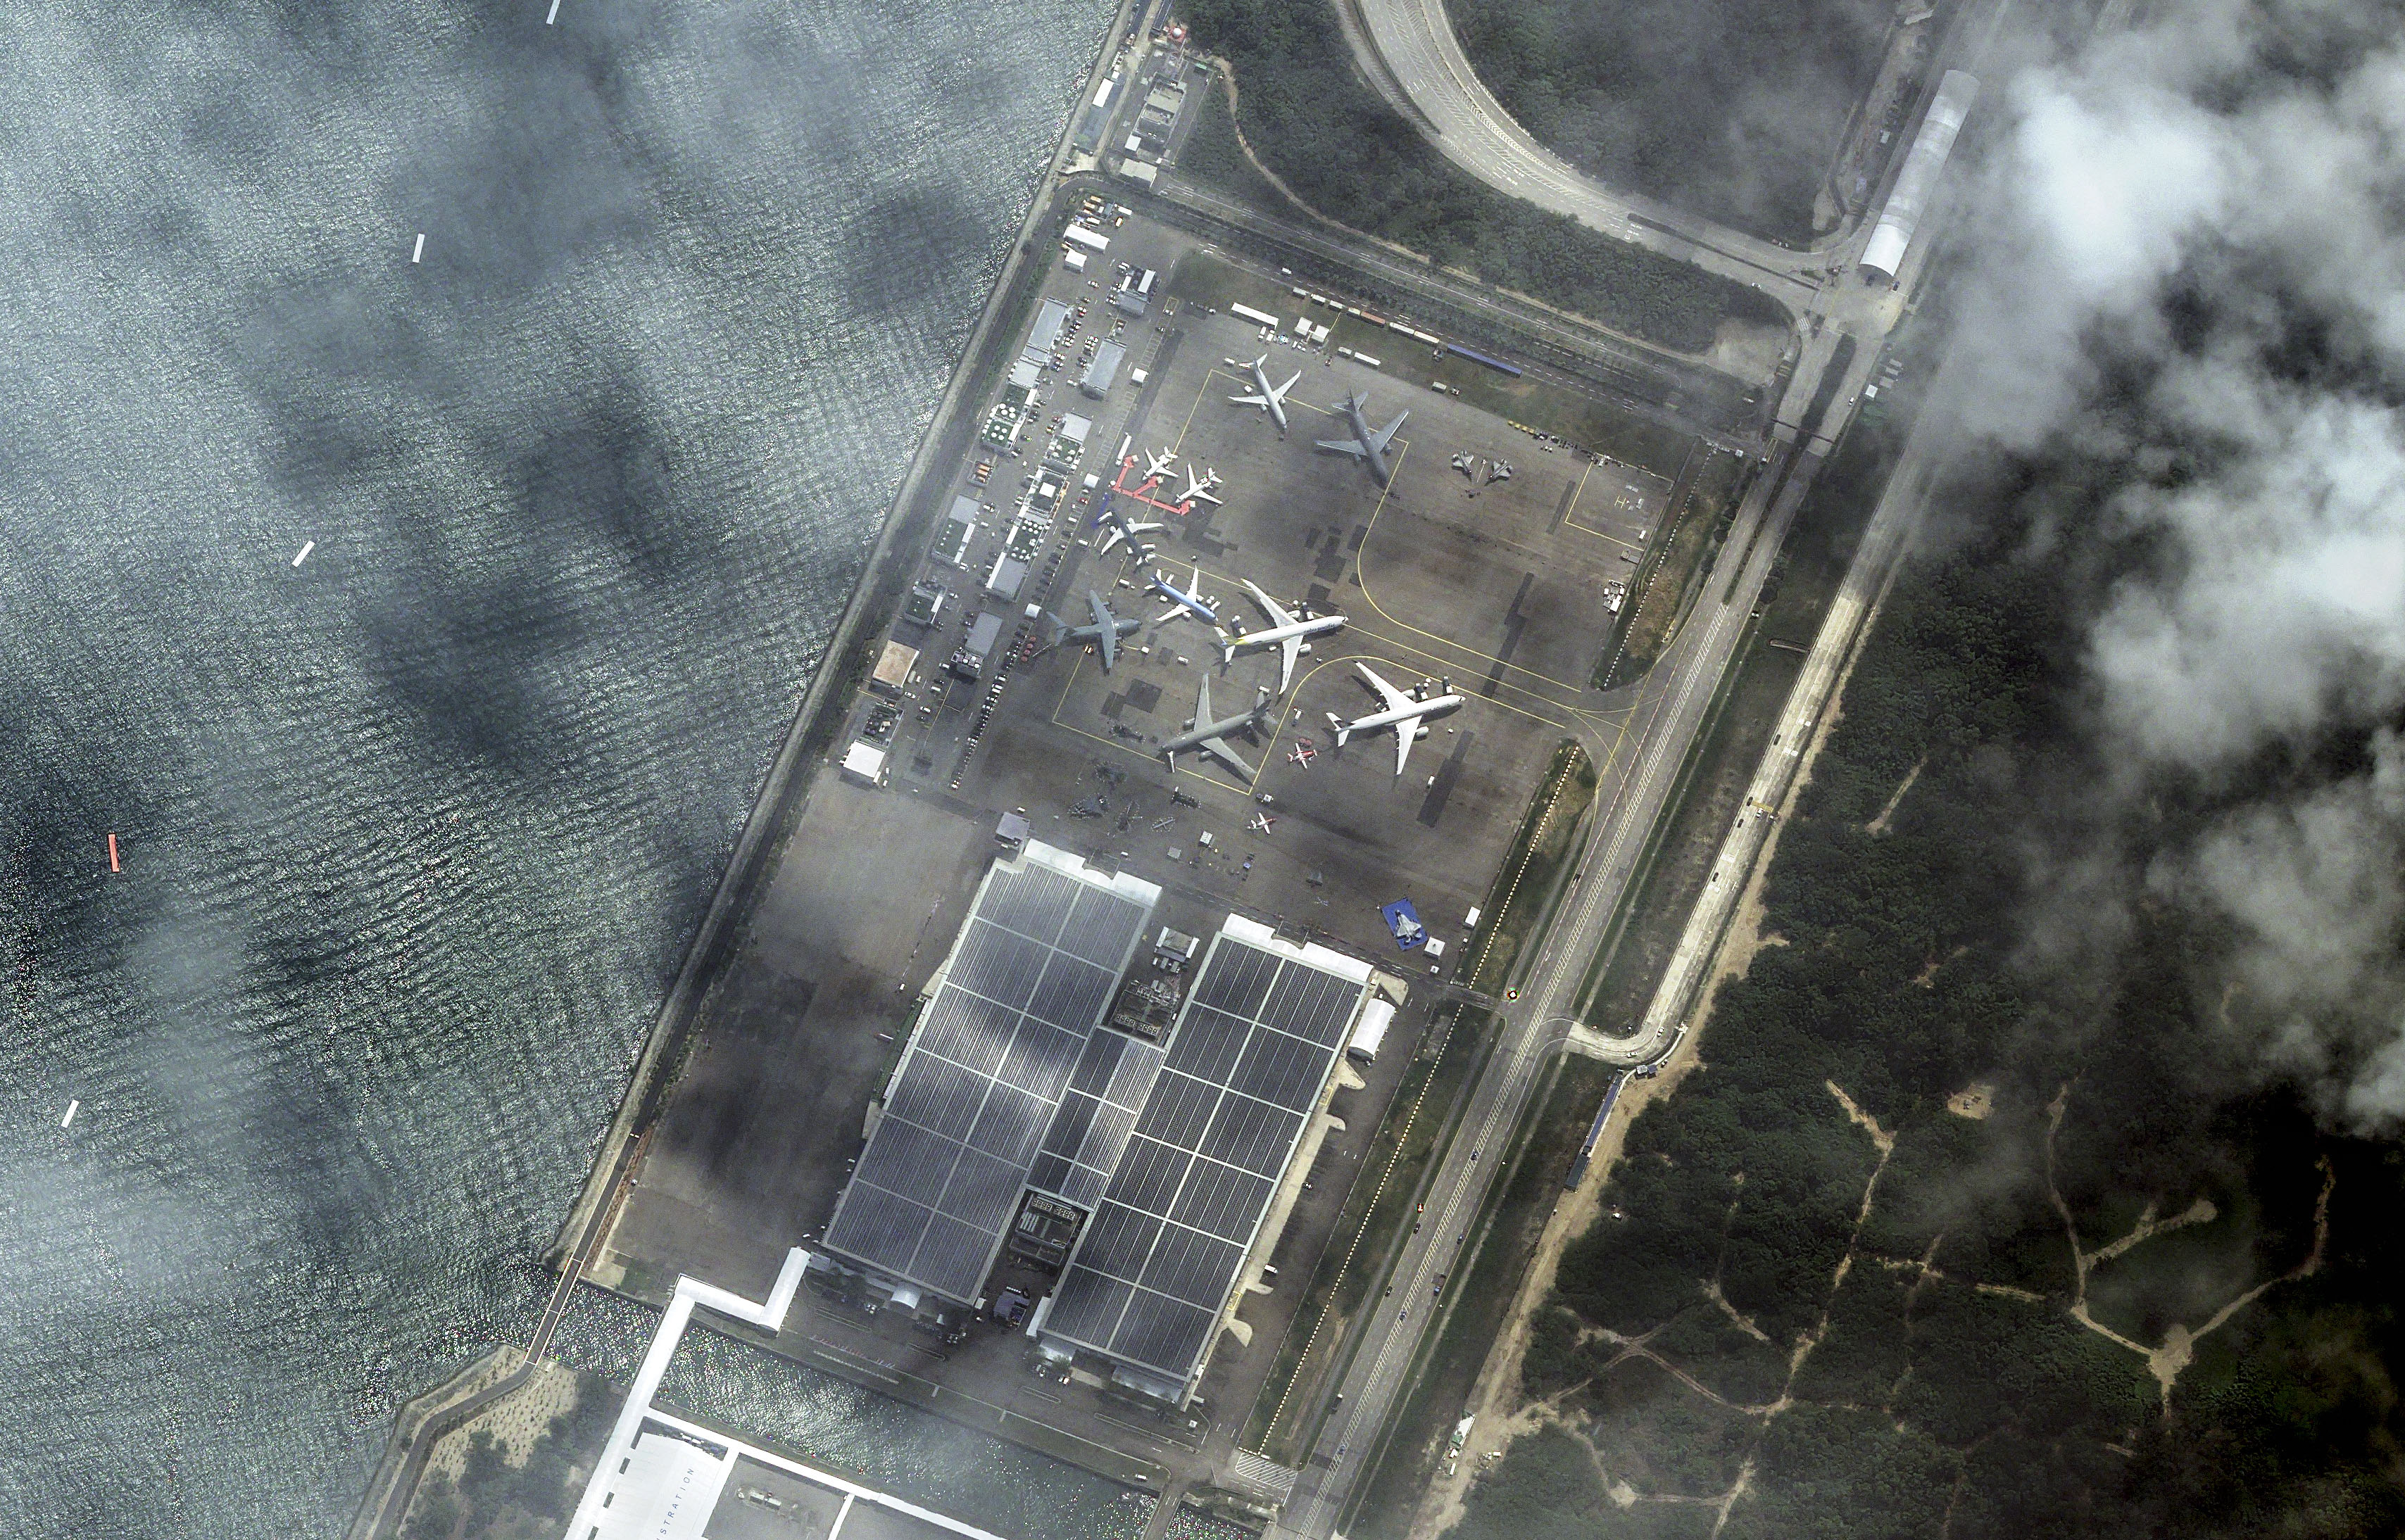 Airbus satellite photo, the lower right corner is the TF-X model, one circle larger than the F-35 in the upper right corner